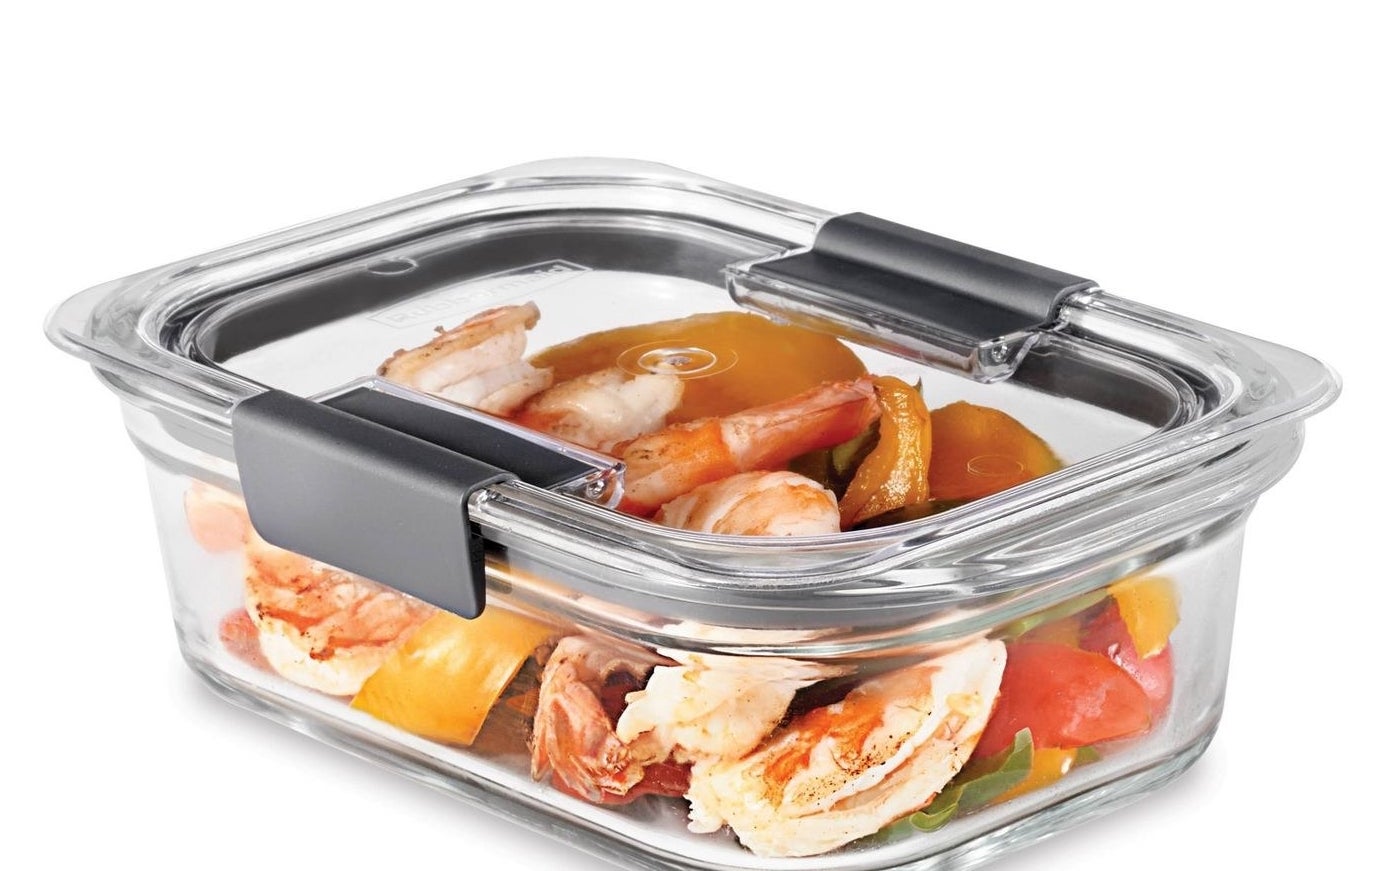 The clear Rubbermaid storage container